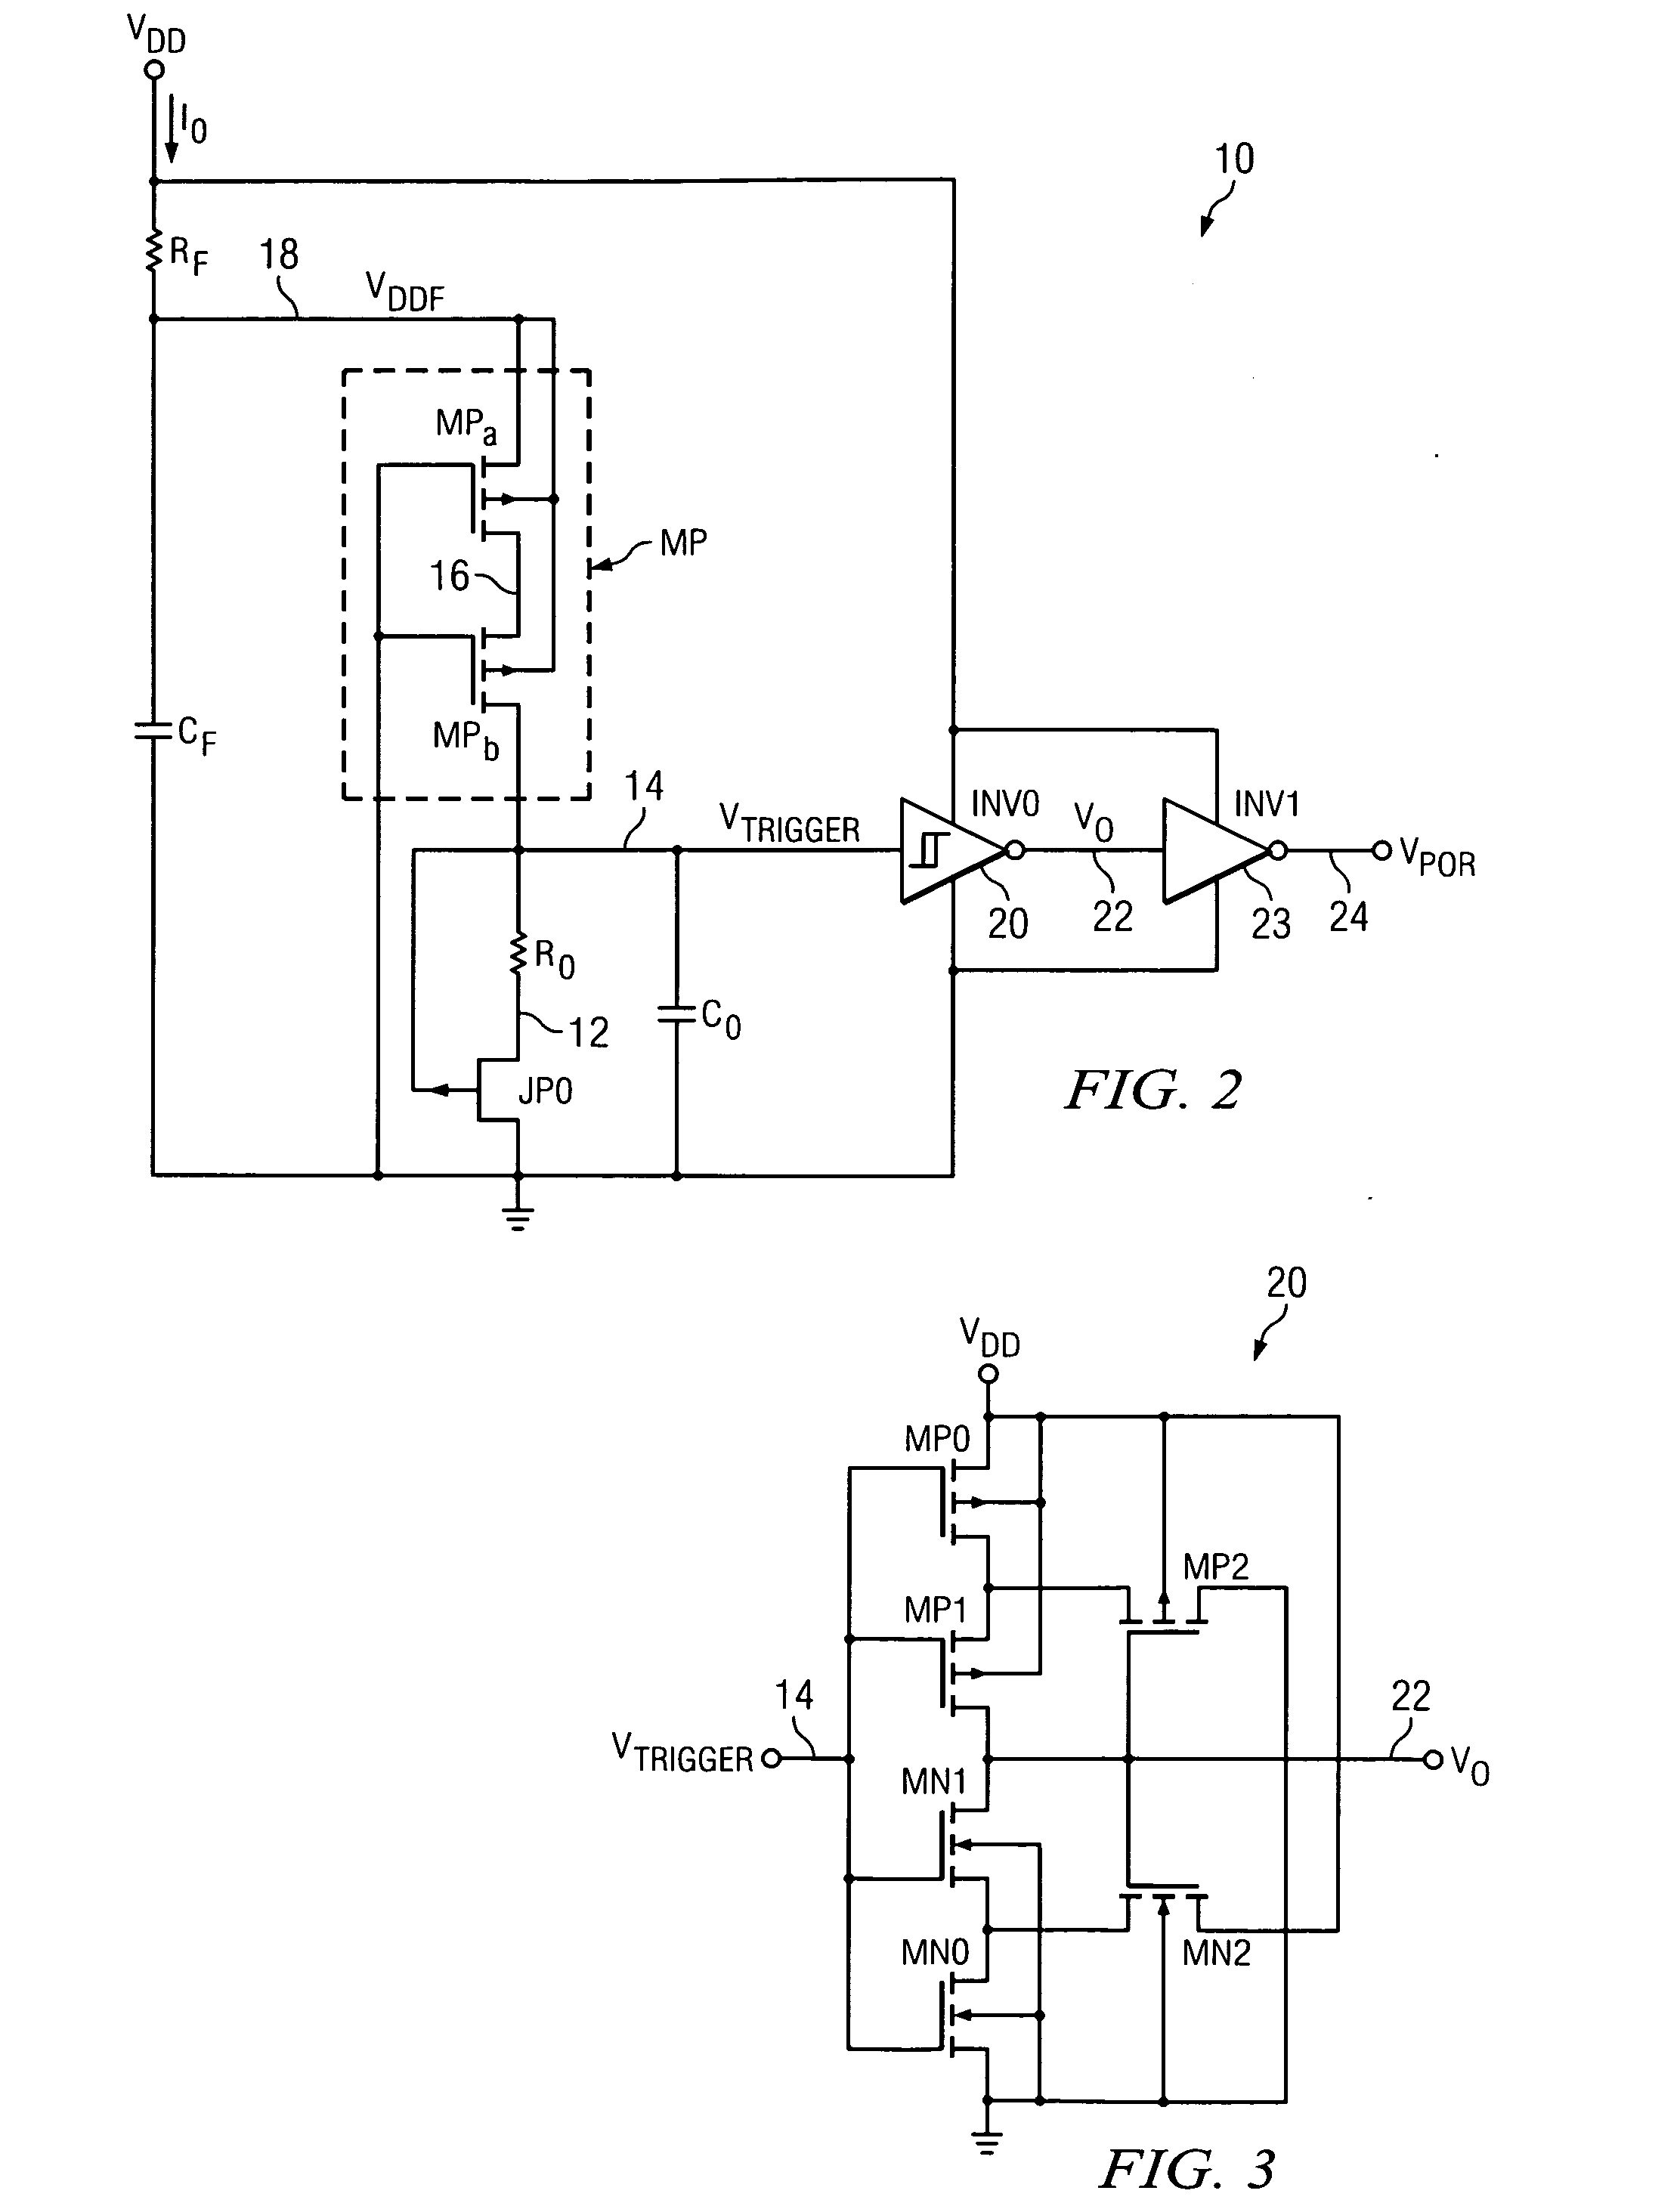 Low current power-on reset circuit and method